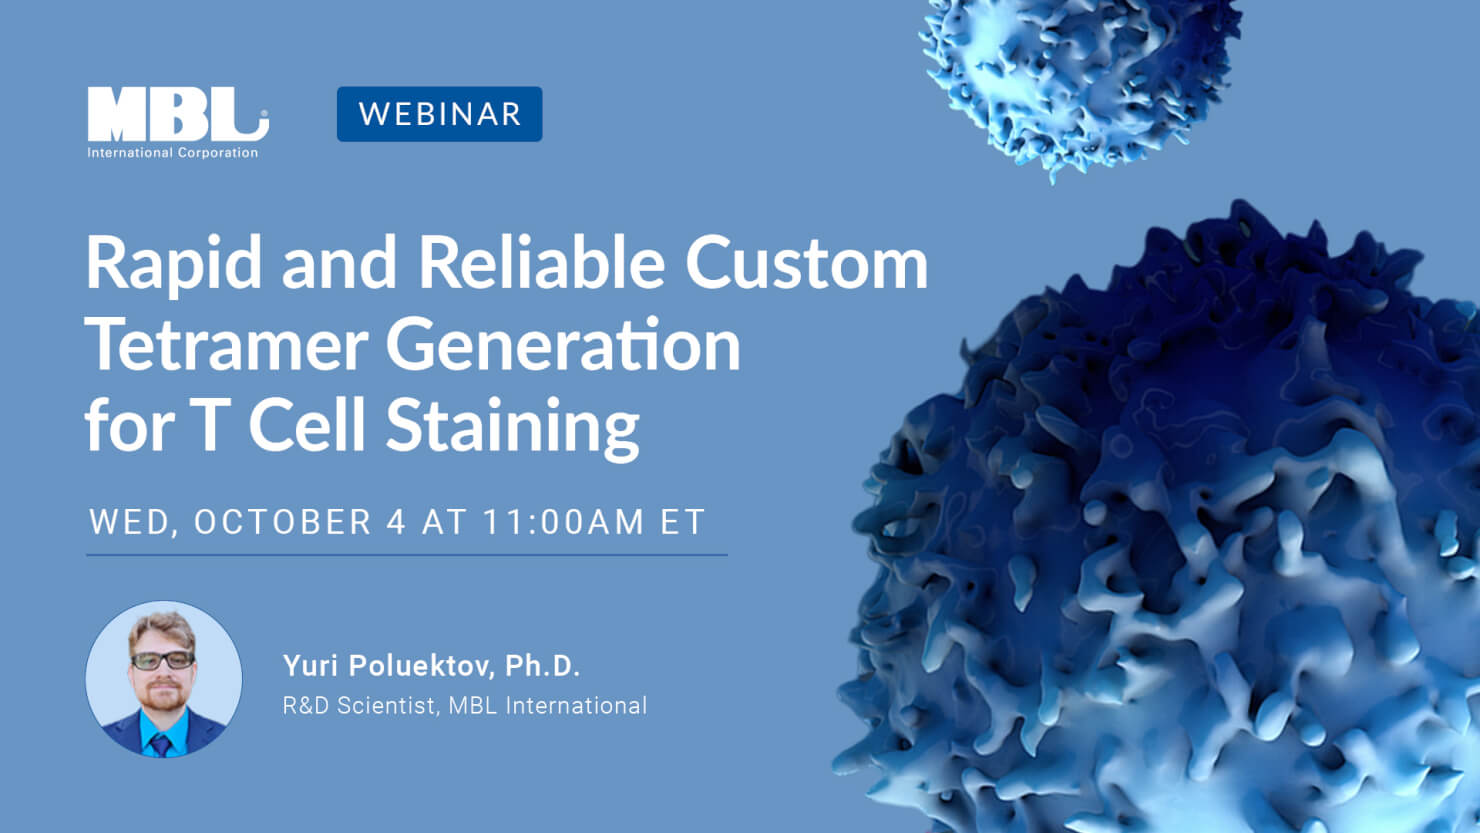 MBL International Webinar - Rapid and Reliable Custom Tetramer Generation for T Cell Staining